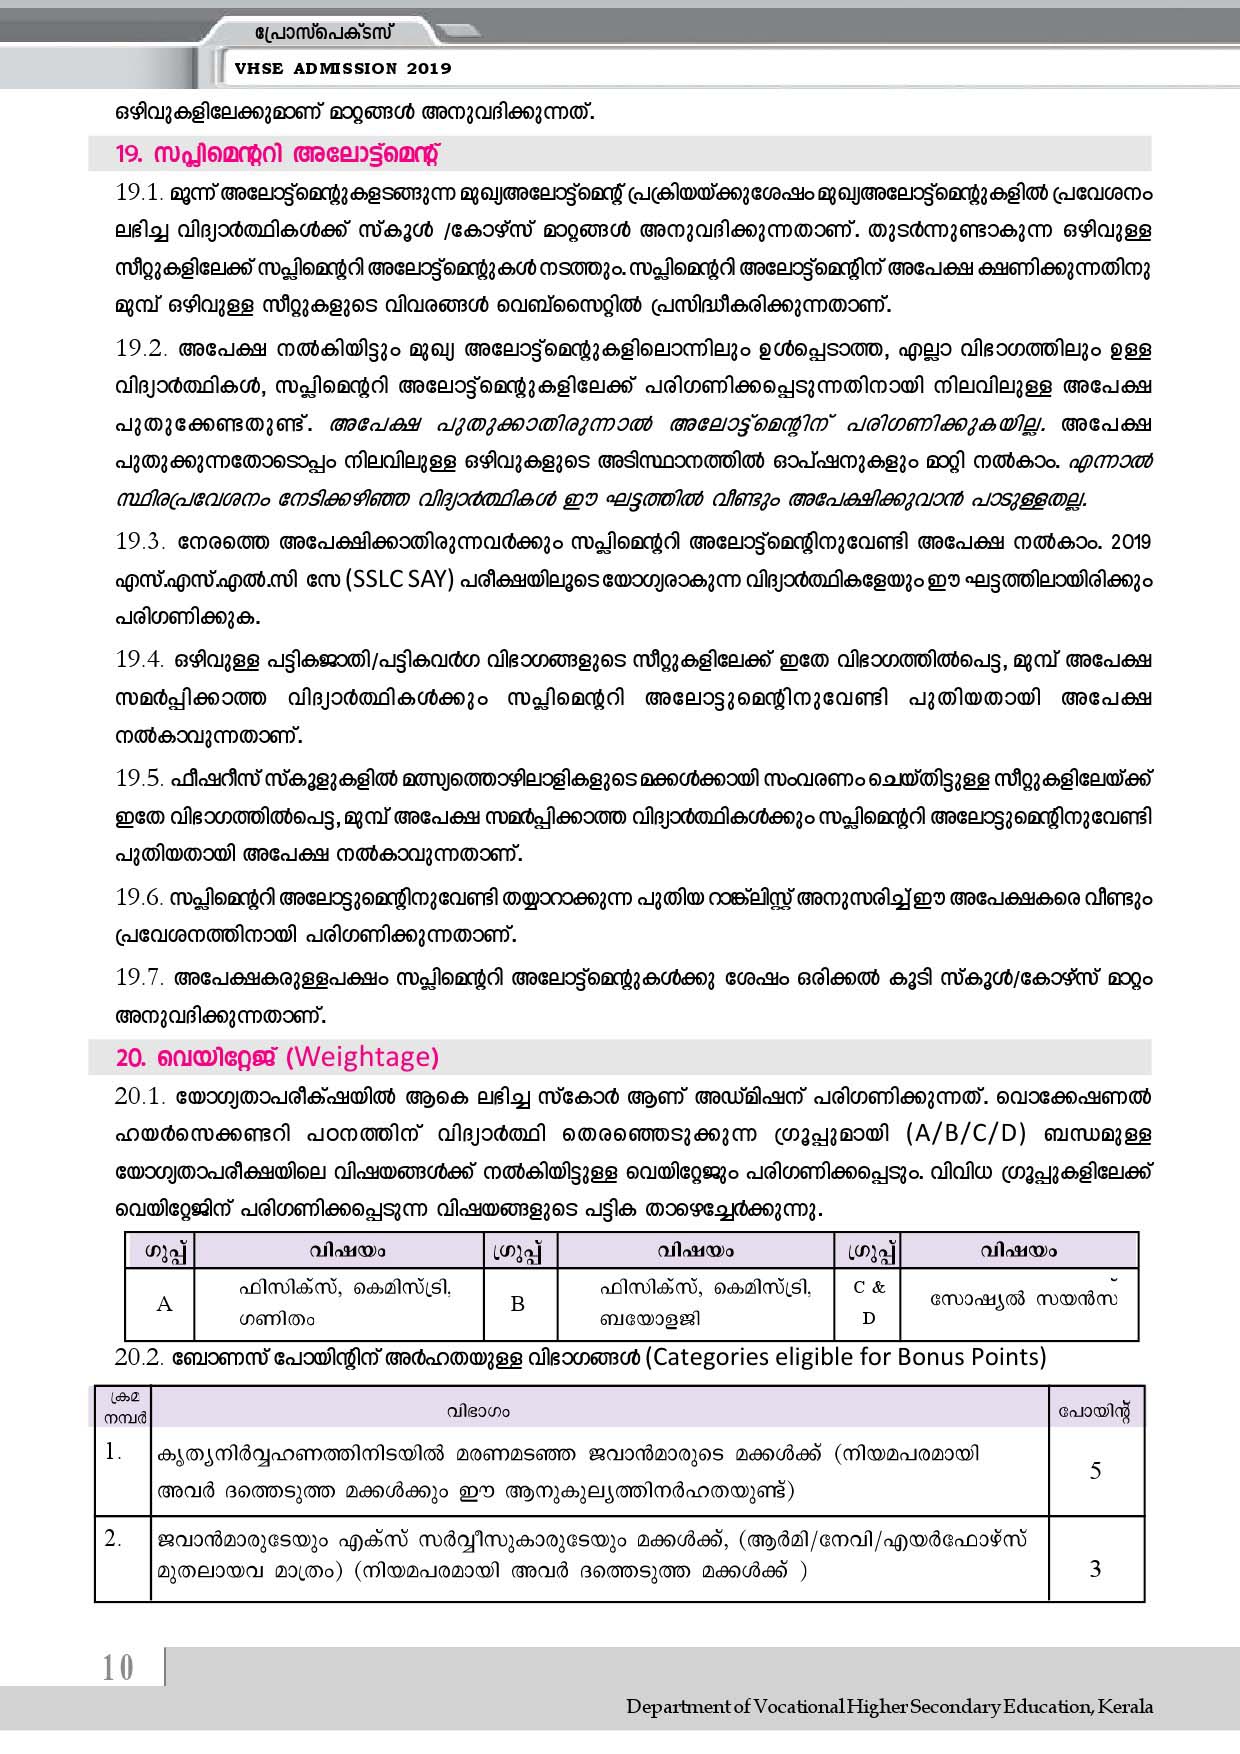 VHSE Admission 2019 Prospectus and Course Details - Notification Image 11